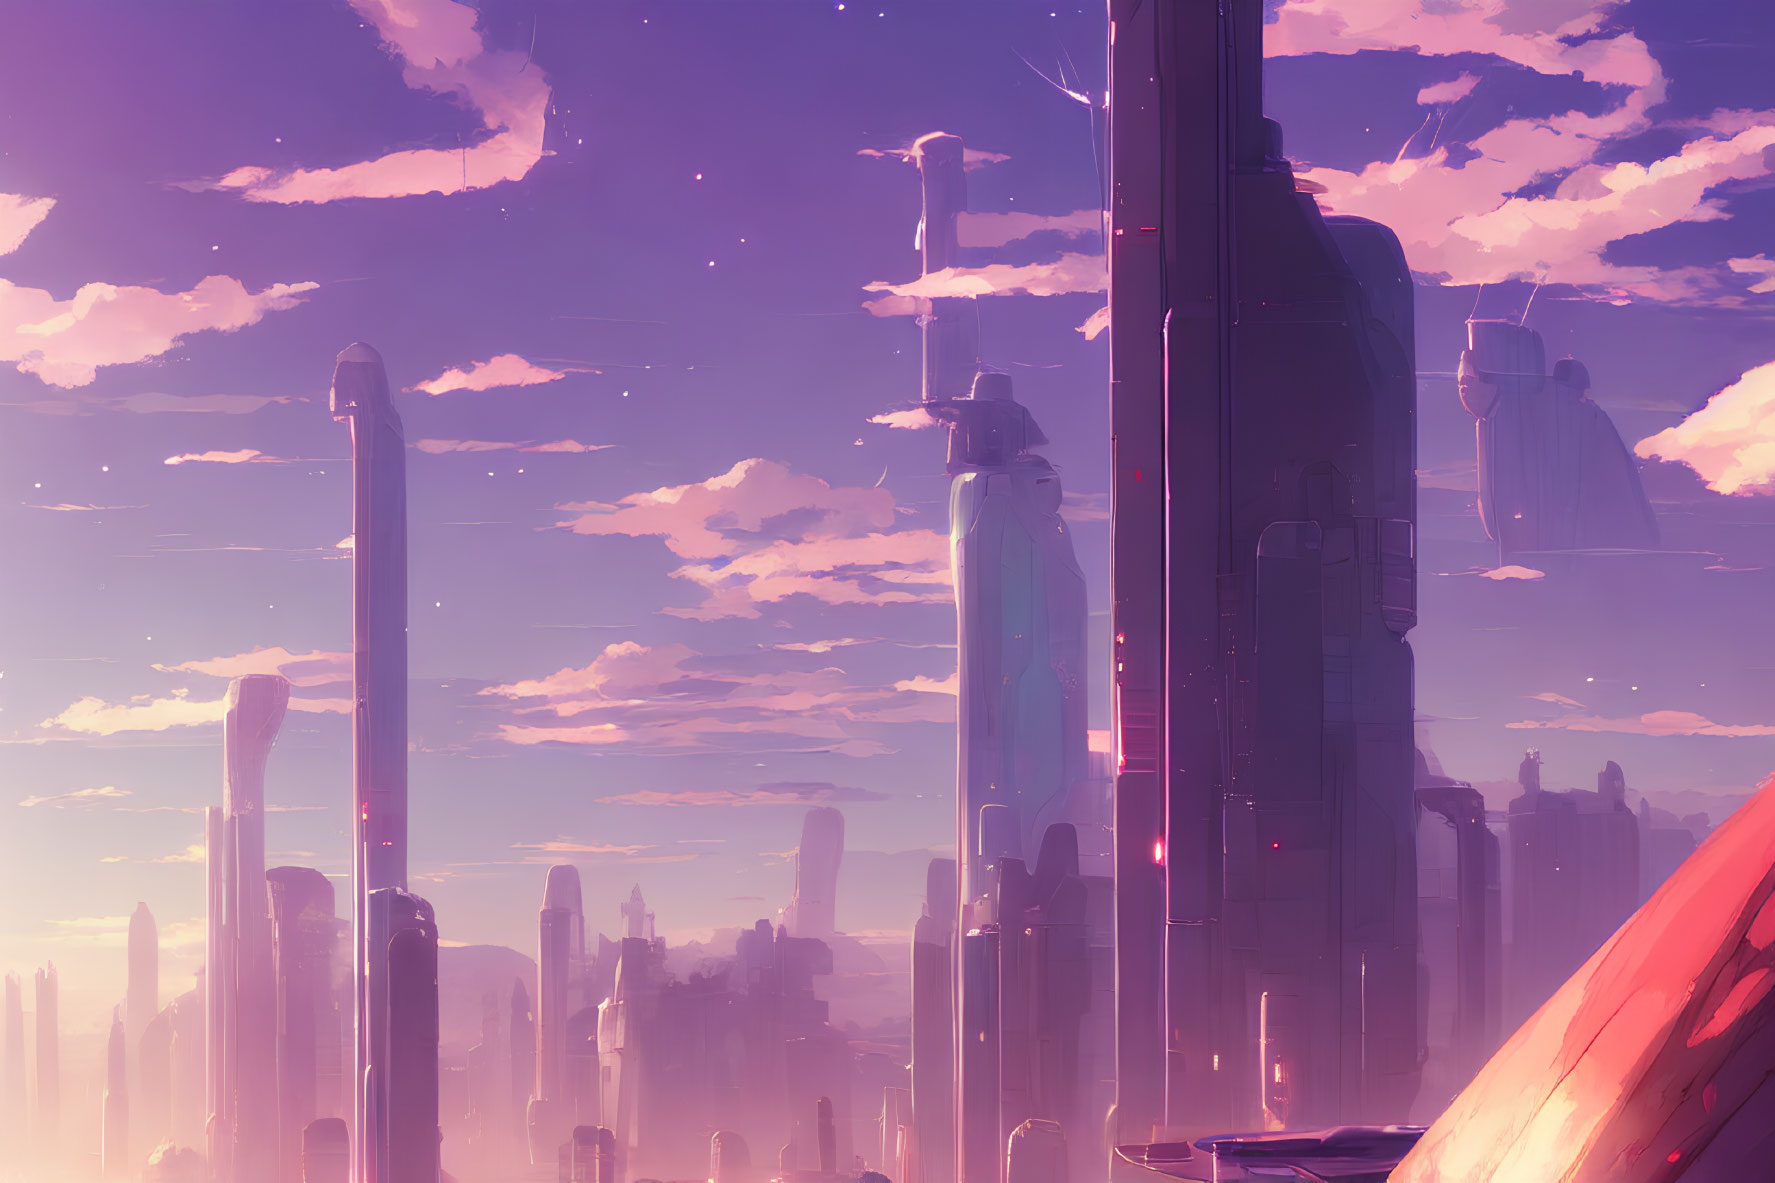 Futuristic cityscape with towering skyscrapers in pink and purple hues